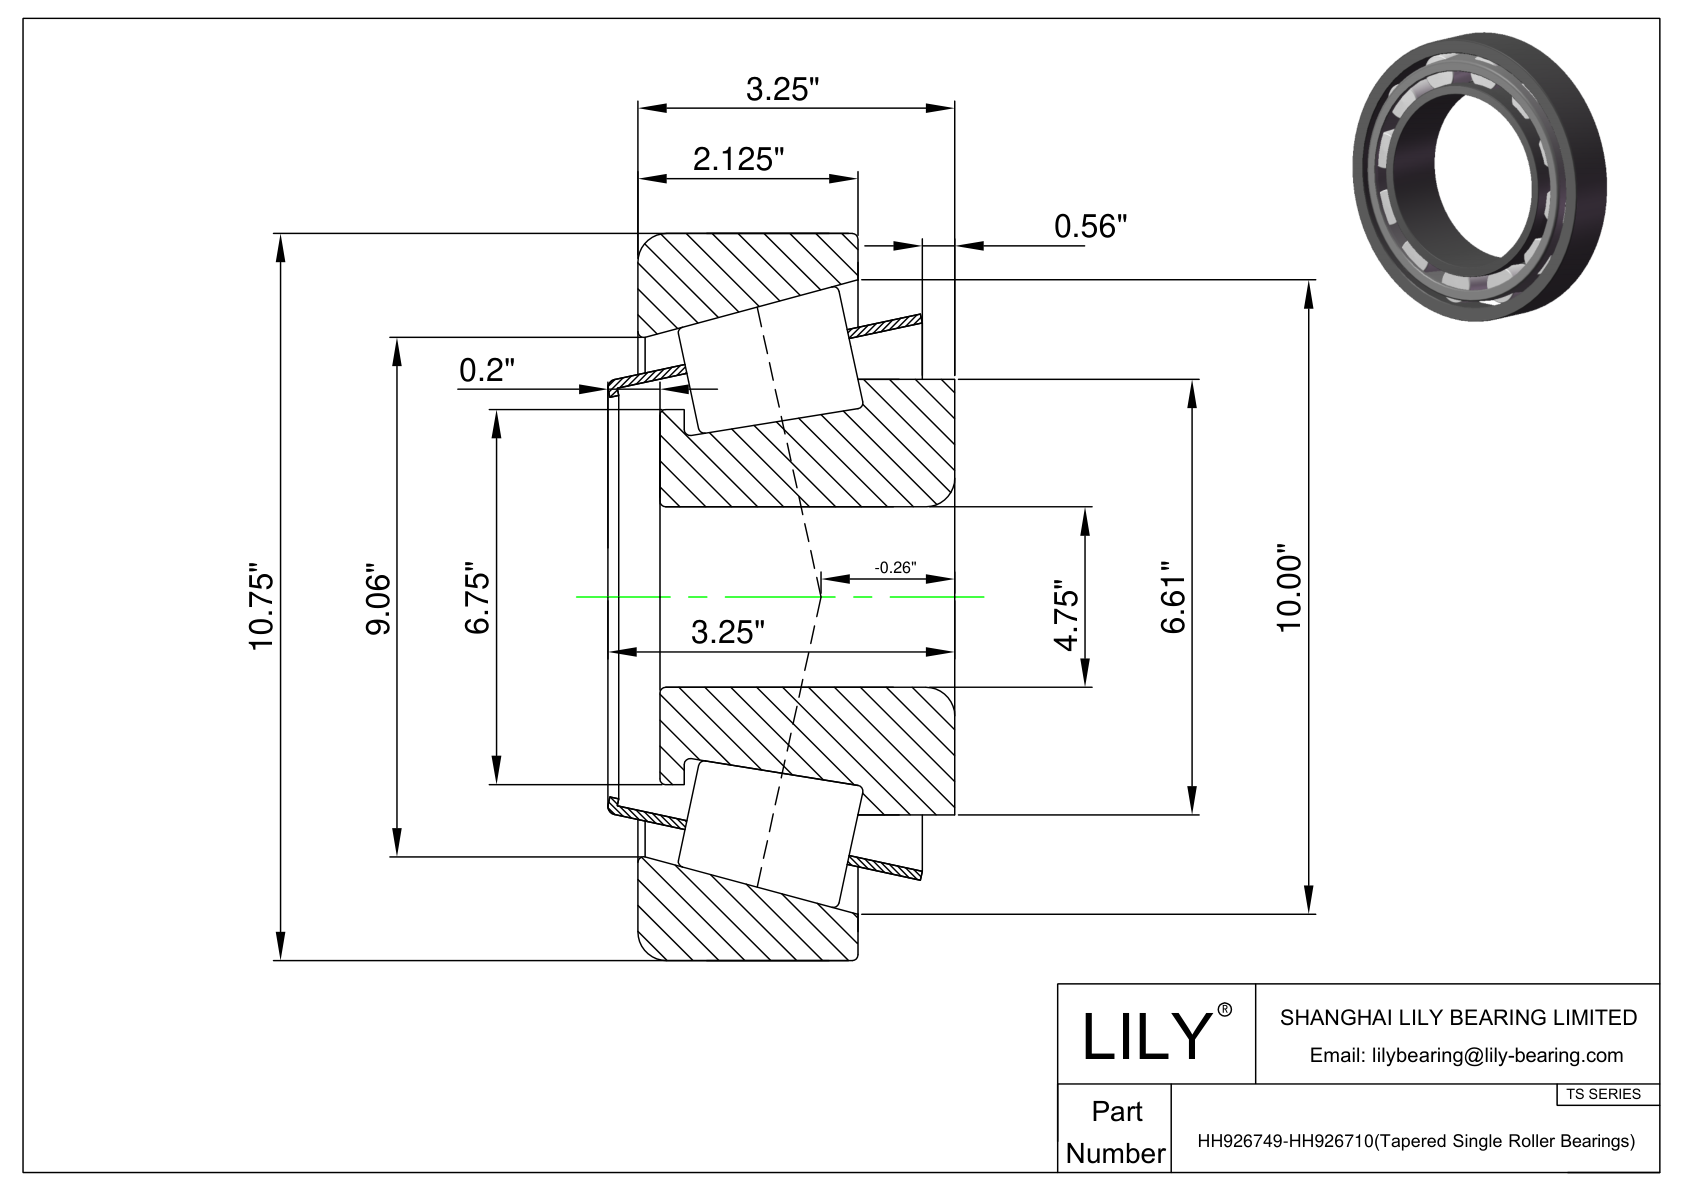 HH926749-HH926710 TS (Tapered Single Roller Bearings) (Imperial) cad drawing